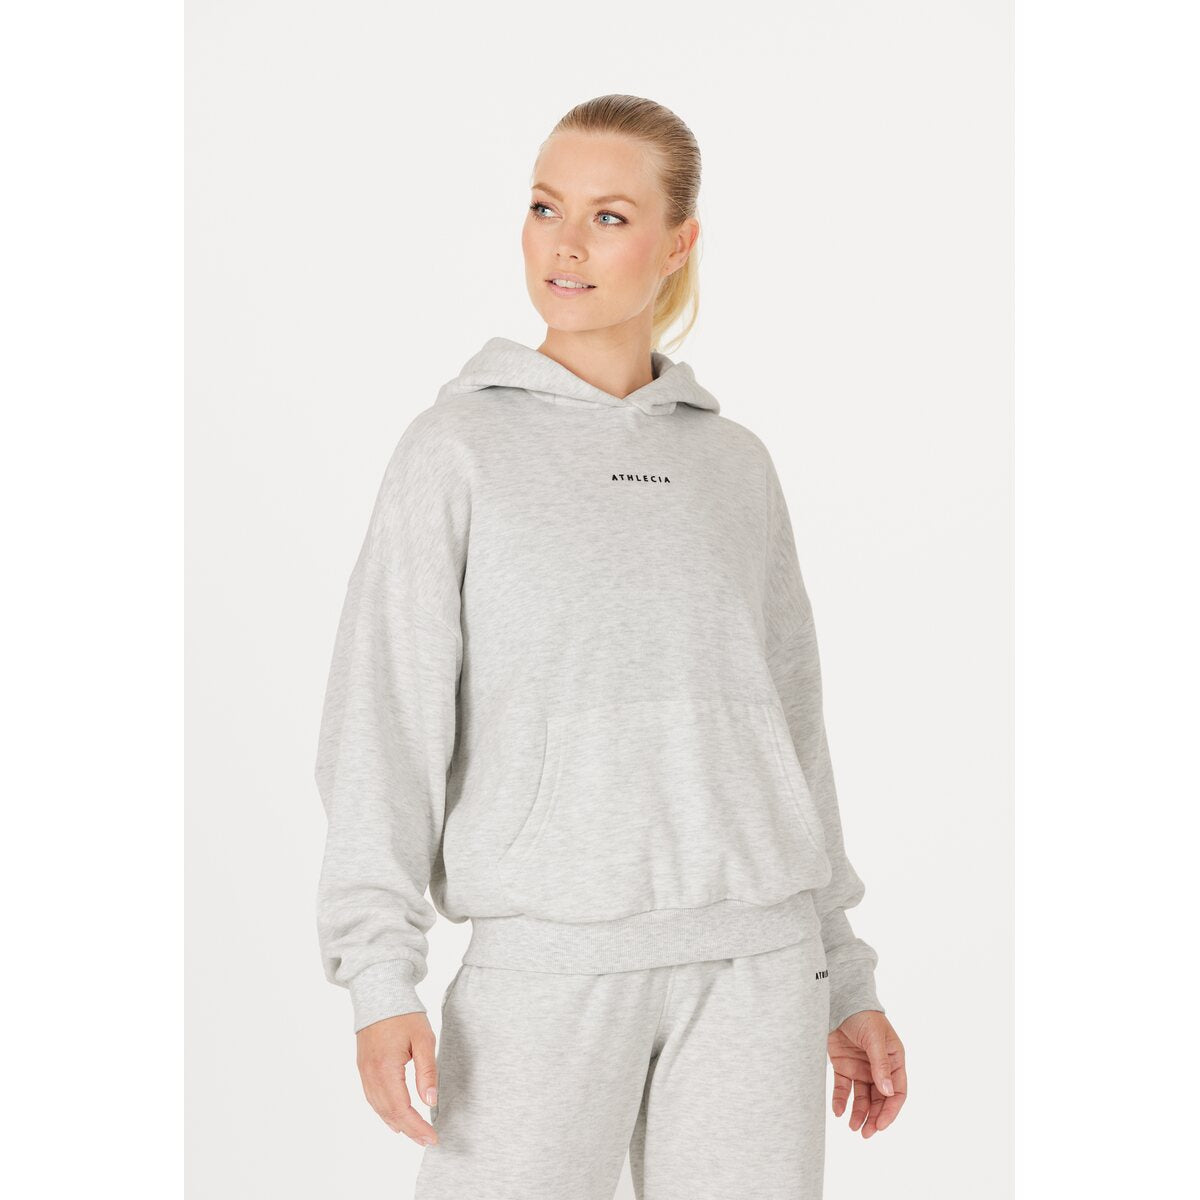 Athlecia Ruthie Womenswear Hoody 2 Shaws Department Stores